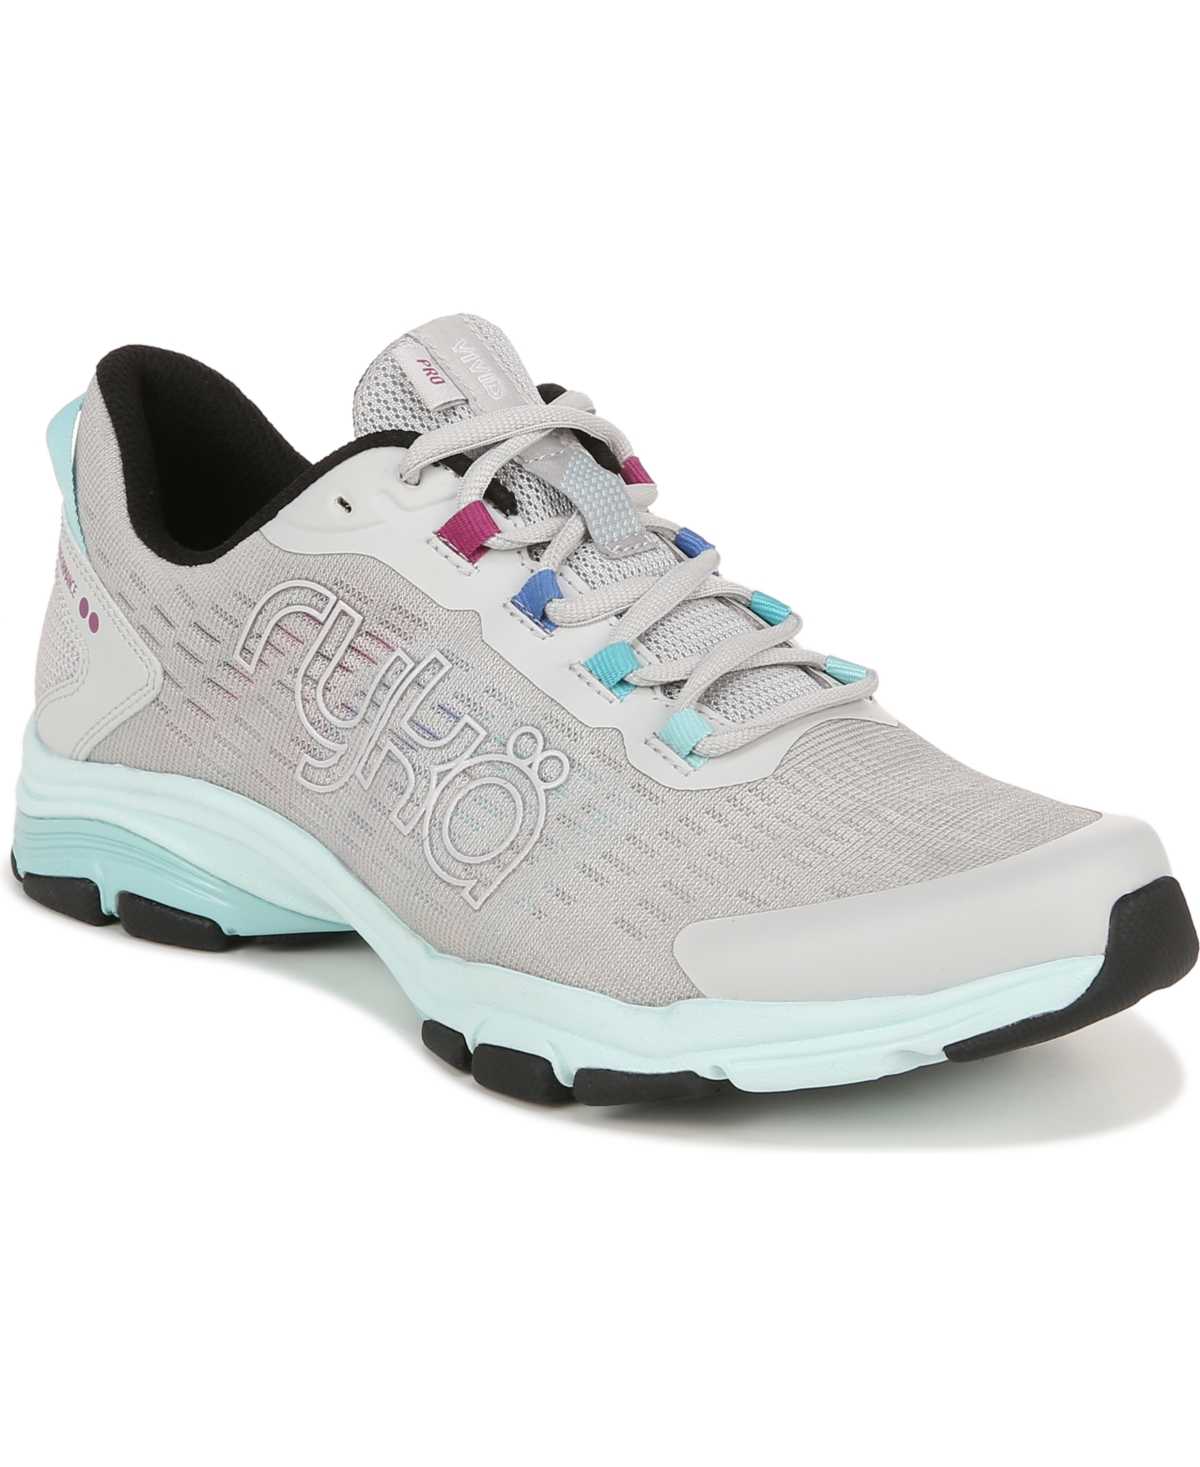 Women's Vivid Pro Training Sneakers - Grey Mesh Fabric/Faux Leather